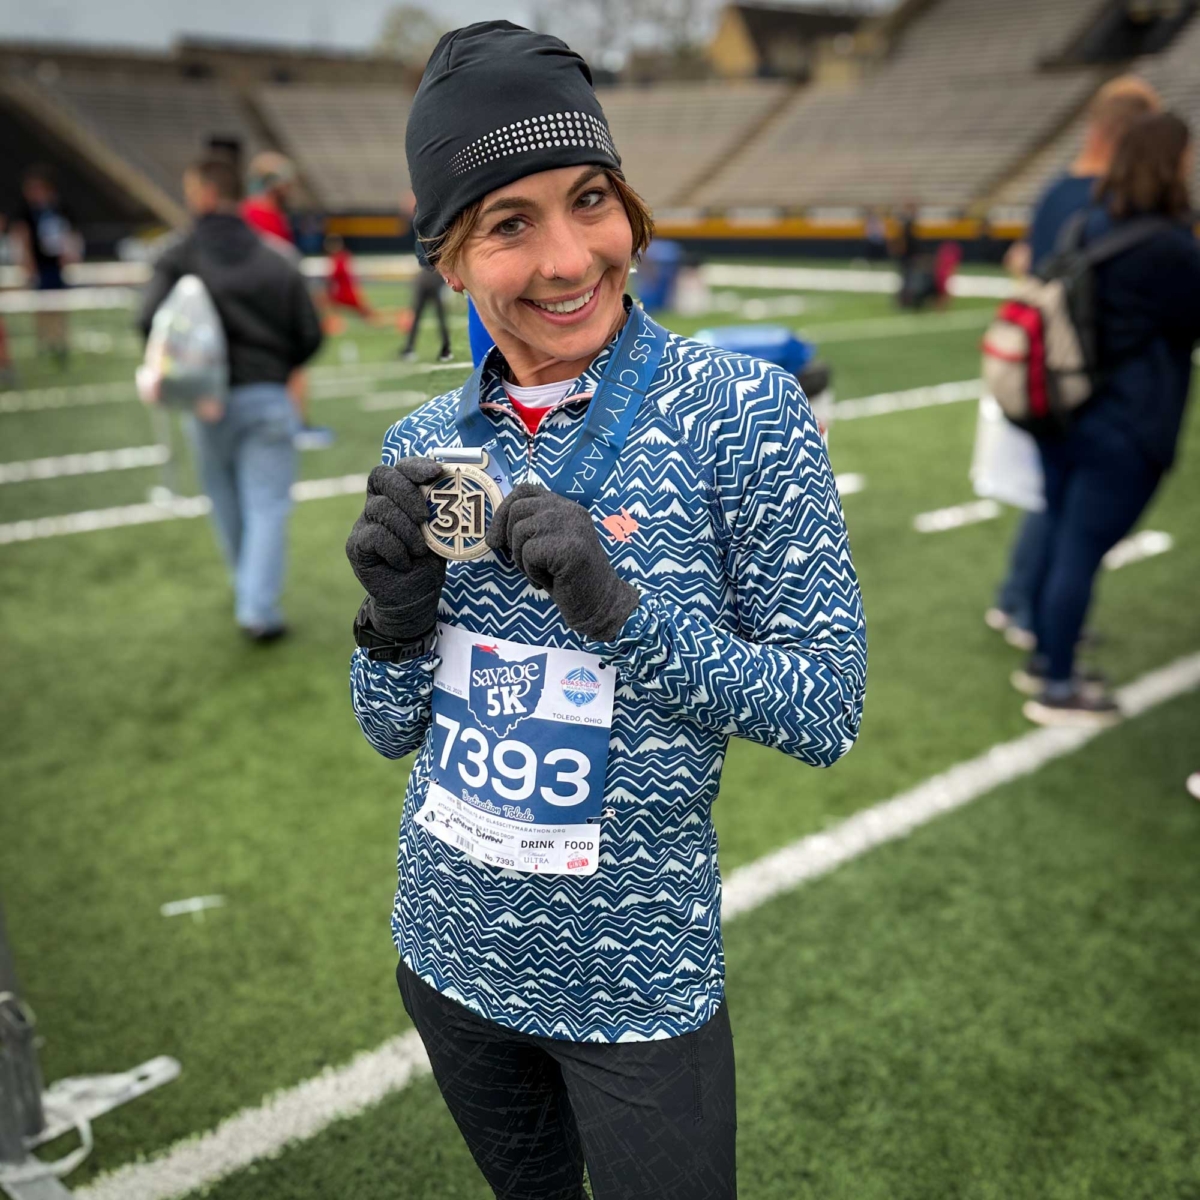 I am an ambitious masters runners who tackles races of varying distances throughout the year, on both road and trail. I BQ'd in my third marathon in Indianapolis at age 47 and I continue to seek out new challenges.